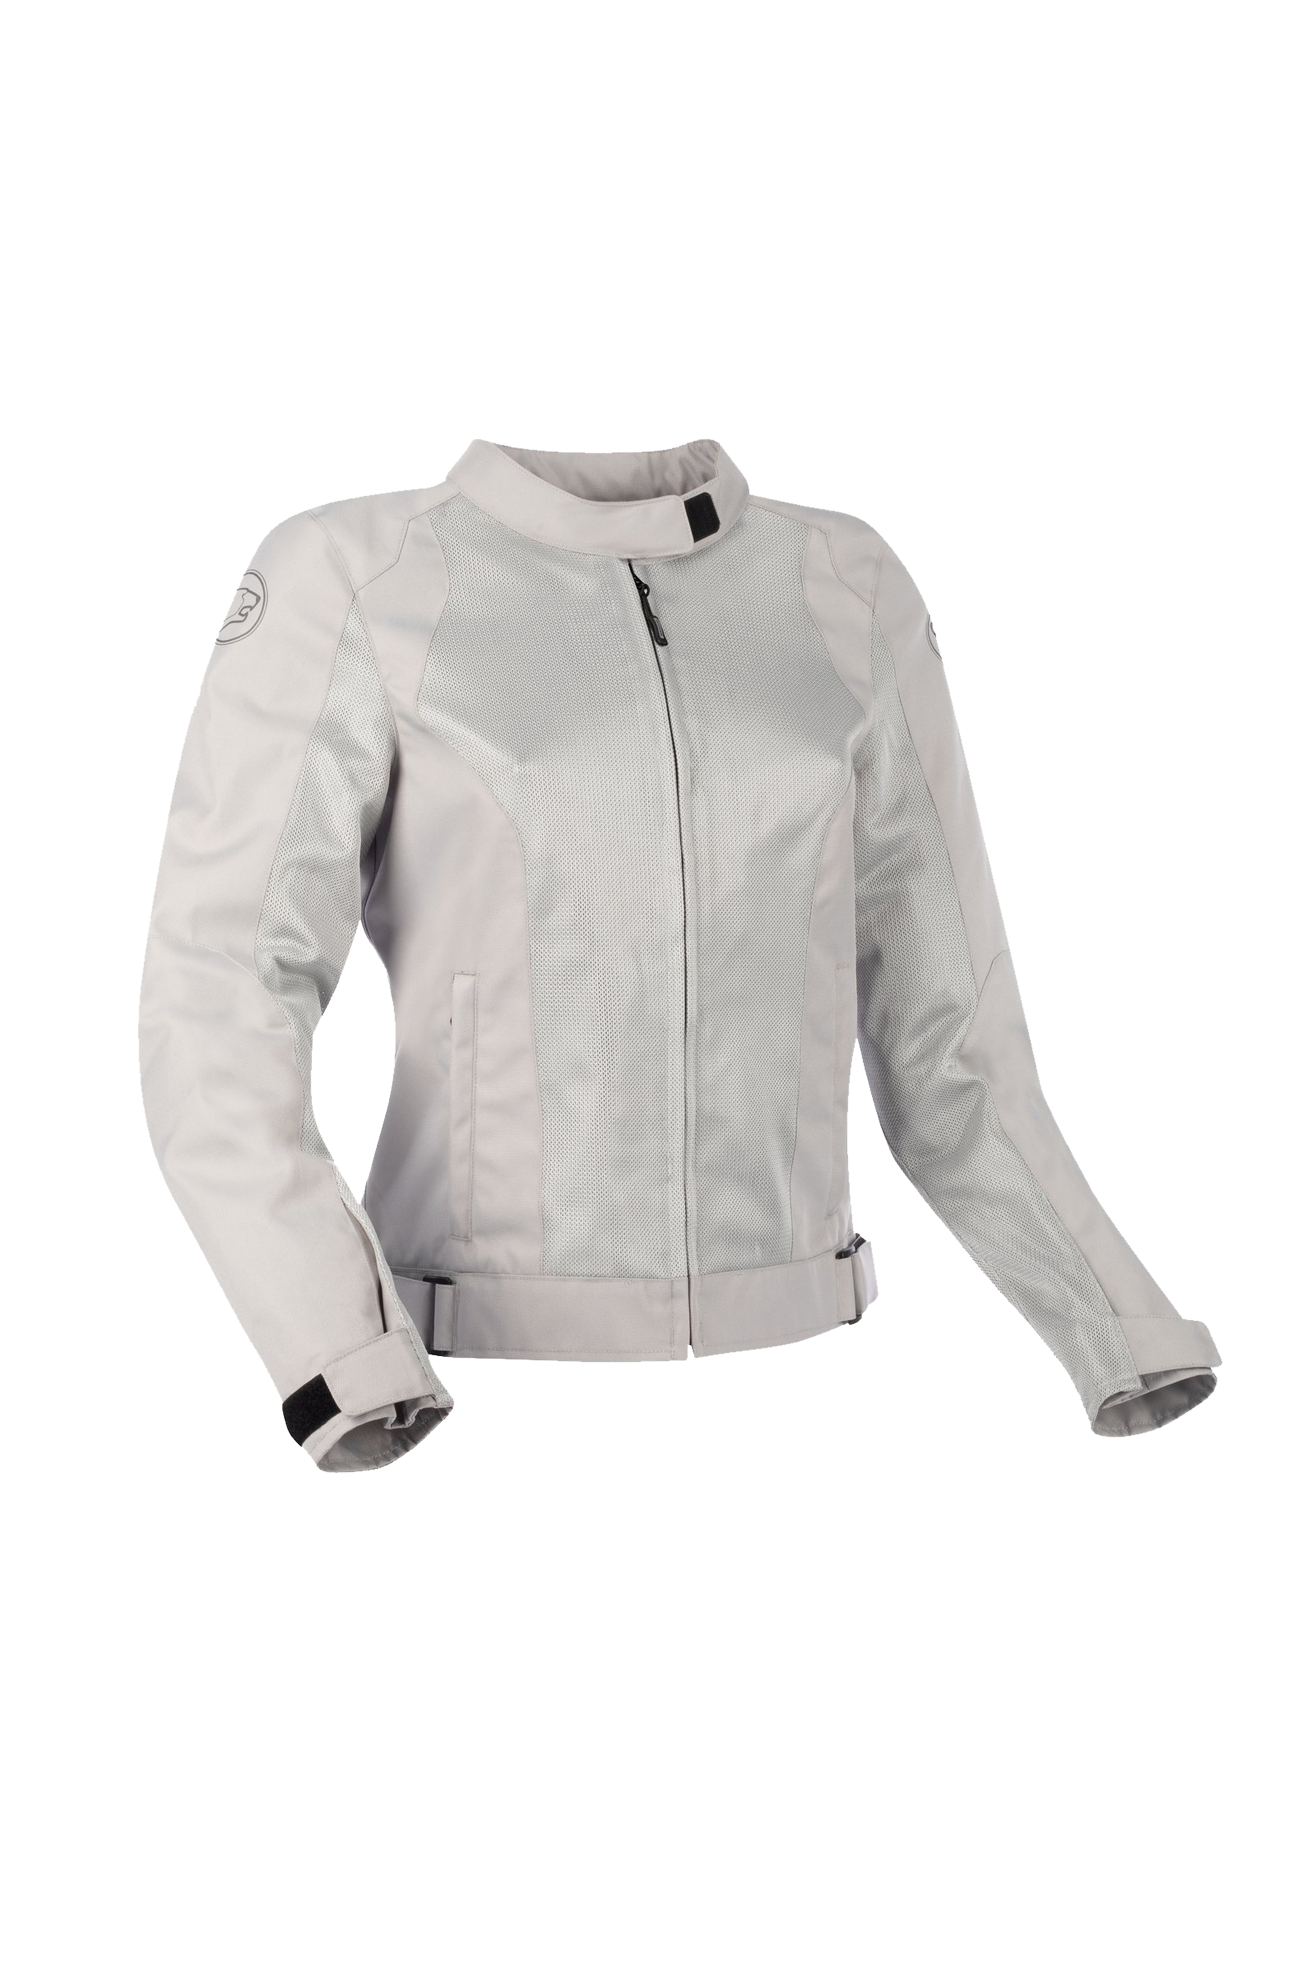 Bering Giacca Moto Donna  Lady Nelson Argento